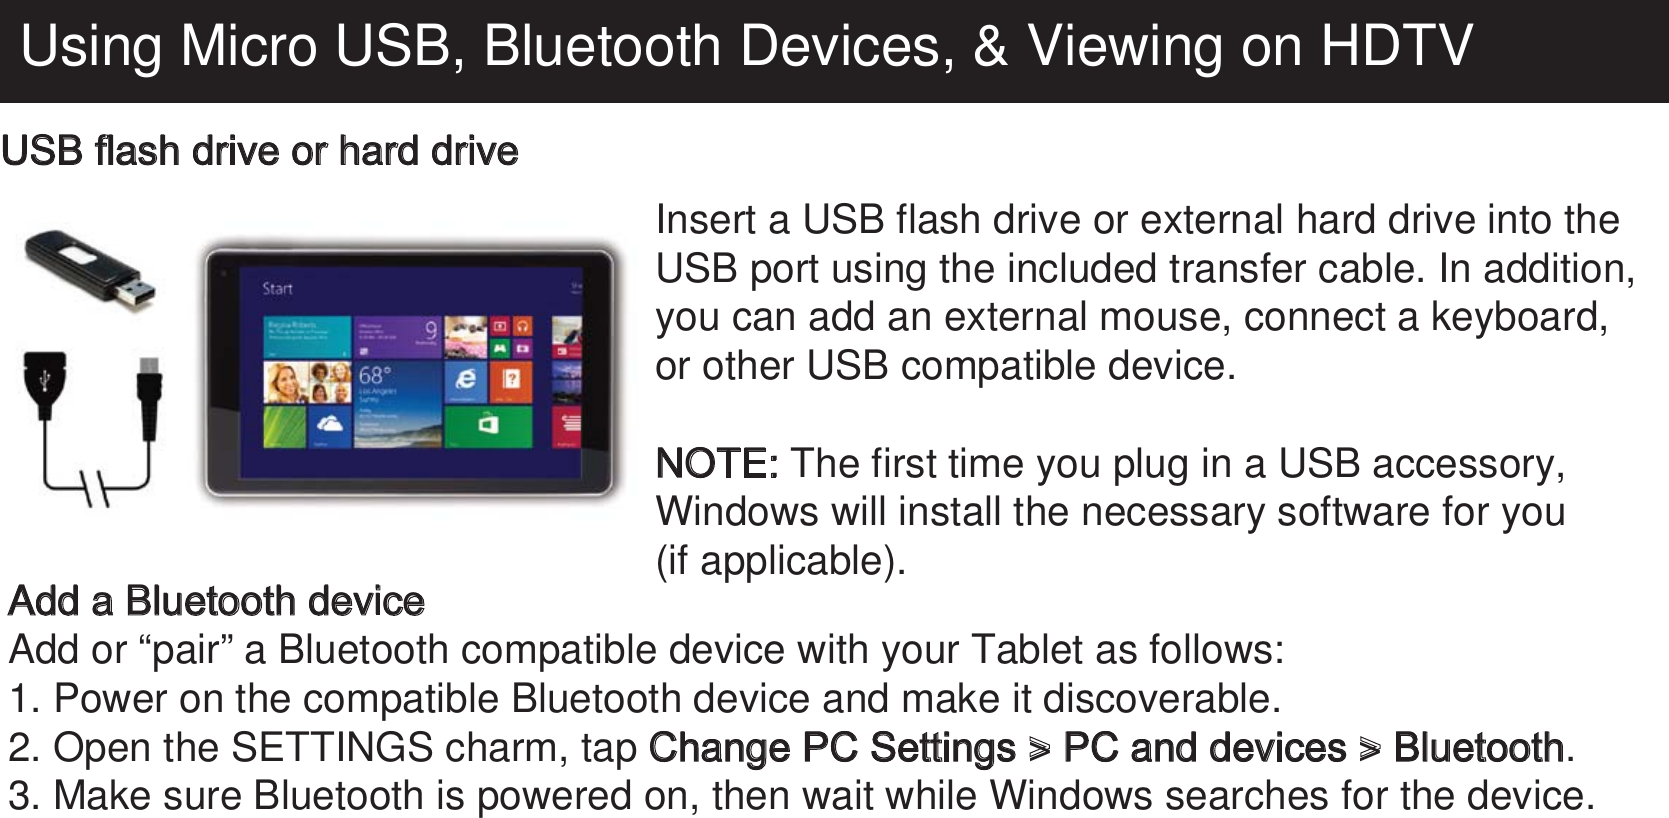 Using Micro USB, Bluetooth Devices, &amp; Viewing on HDTVUSB flash drive or hard drive Insert a USB flash drive or external hard drive into the USB port using the included transfer cable. In addition, you can add an external mouse, connect a keyboard, or other USB compatible device.NOTE: The first time you plug in a USB accessory, Windows will install the necessary software for you(if applicable).Add a Bluetooth deviceAdd or “pair” a Bluetooth compatible device with your Tablet as follows:1. Power on the compatible Bluetooth device and make it discoverable.2. Open the SETTINGS charm, tap Change PC Settings &gt; PC and devices &gt; Bluetooth.3. Make sure Bluetooth is powered on, then wait while Windows searches for the device.